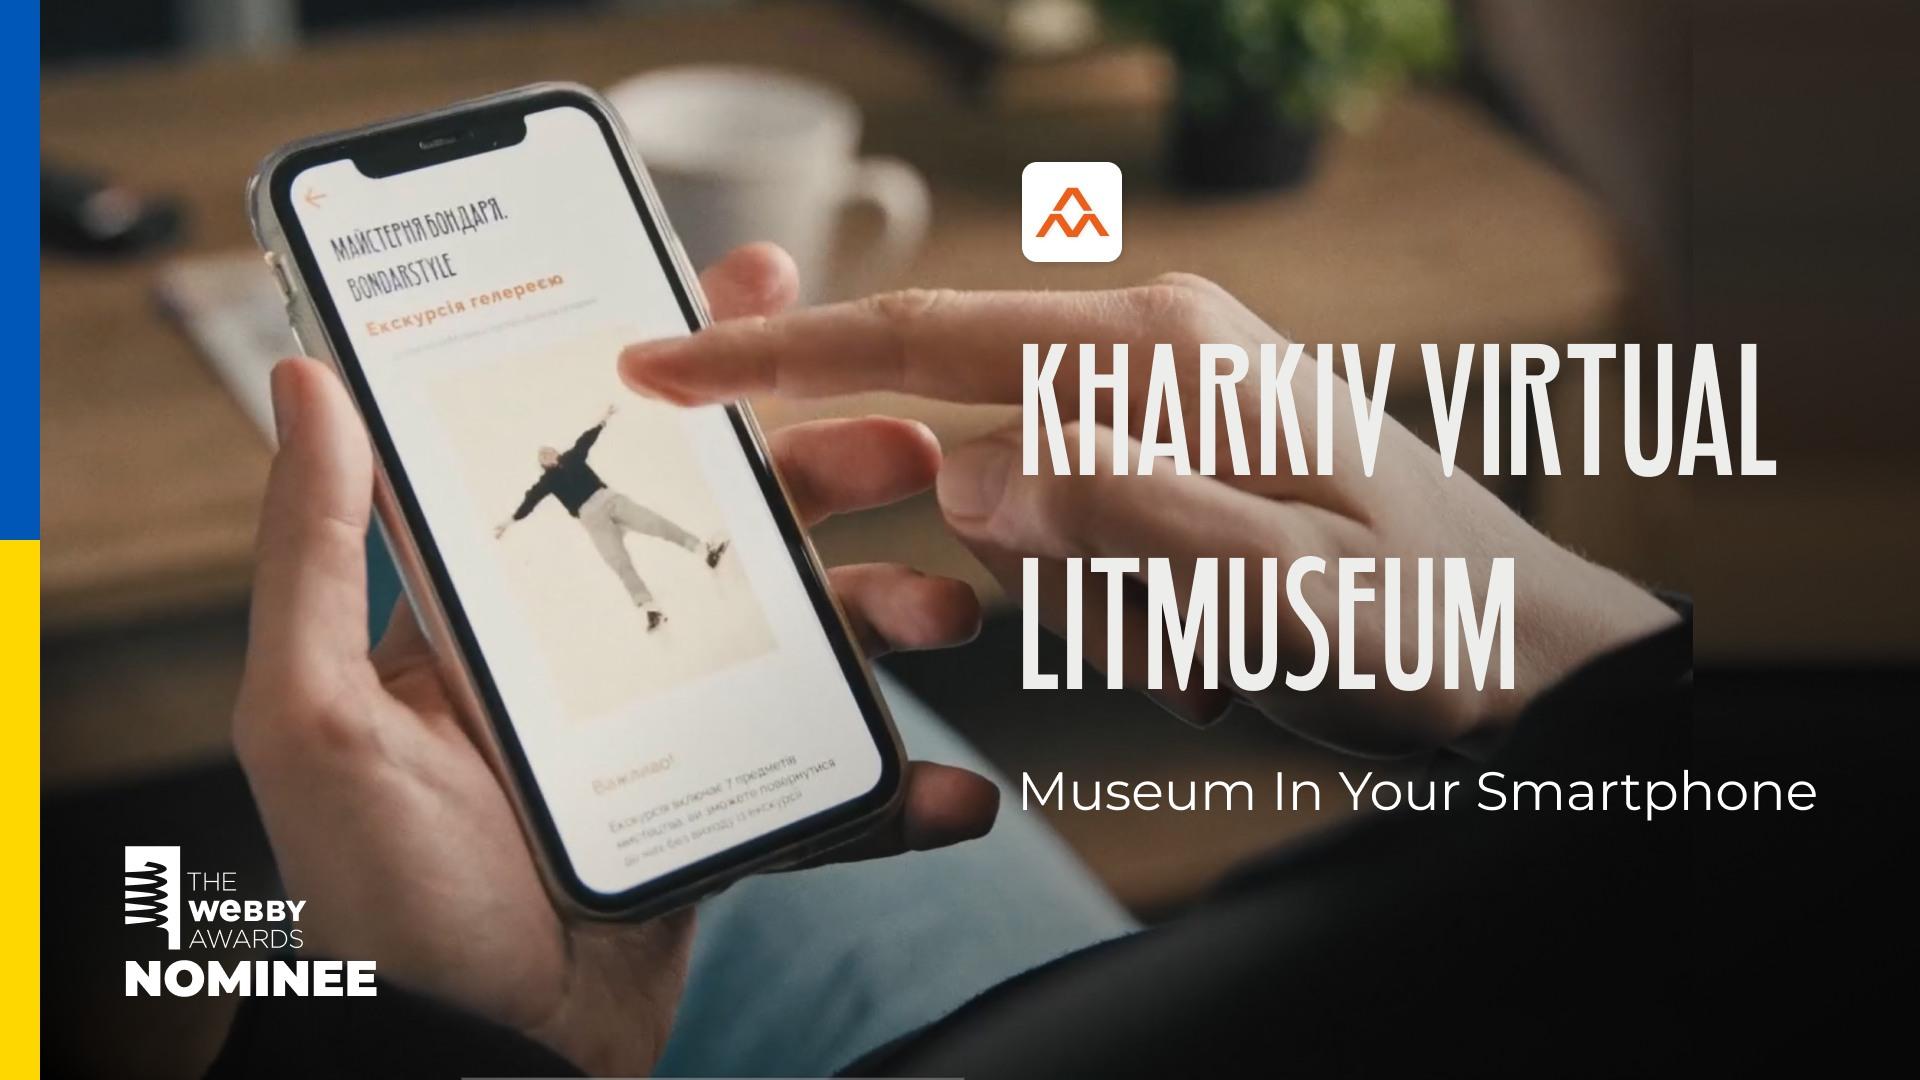 The Kharkiv Literary Museum among the 5 nominees of The Webby Awards